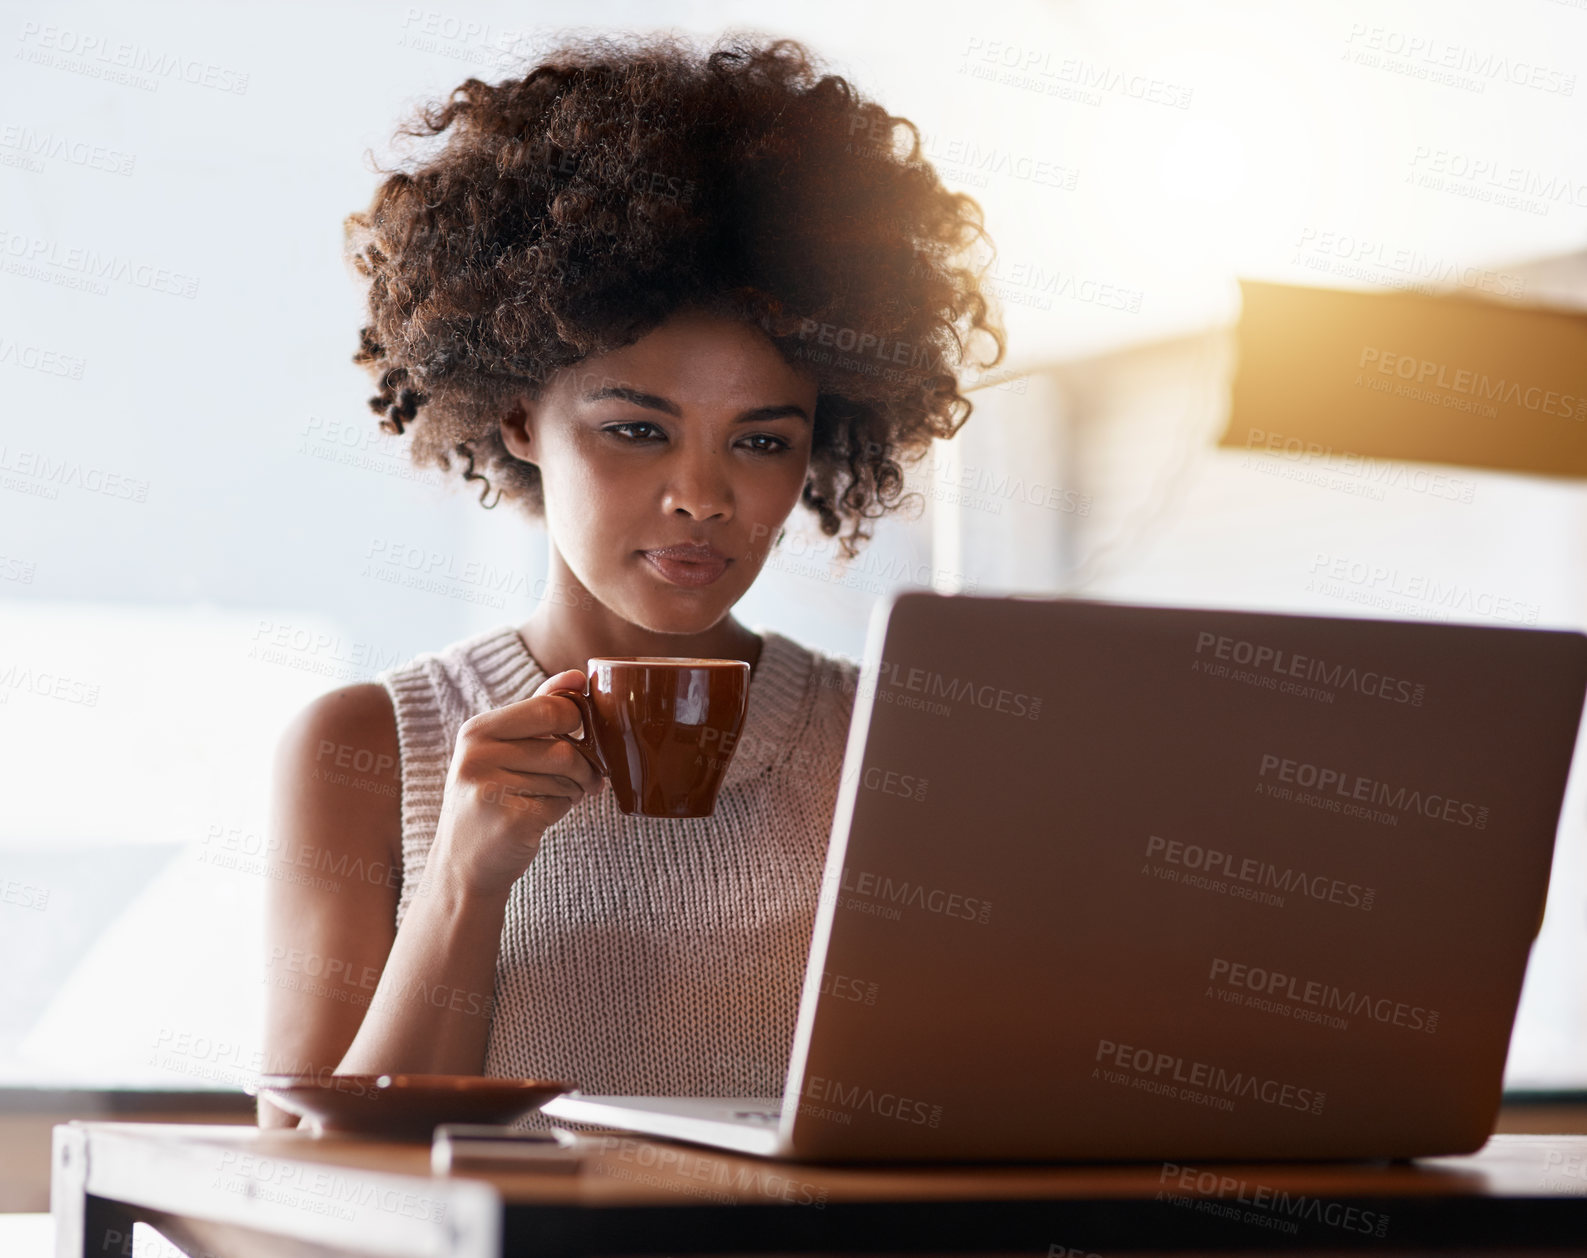 Buy stock photo Shot of a young business owner using a laptop while sitting in her cafe